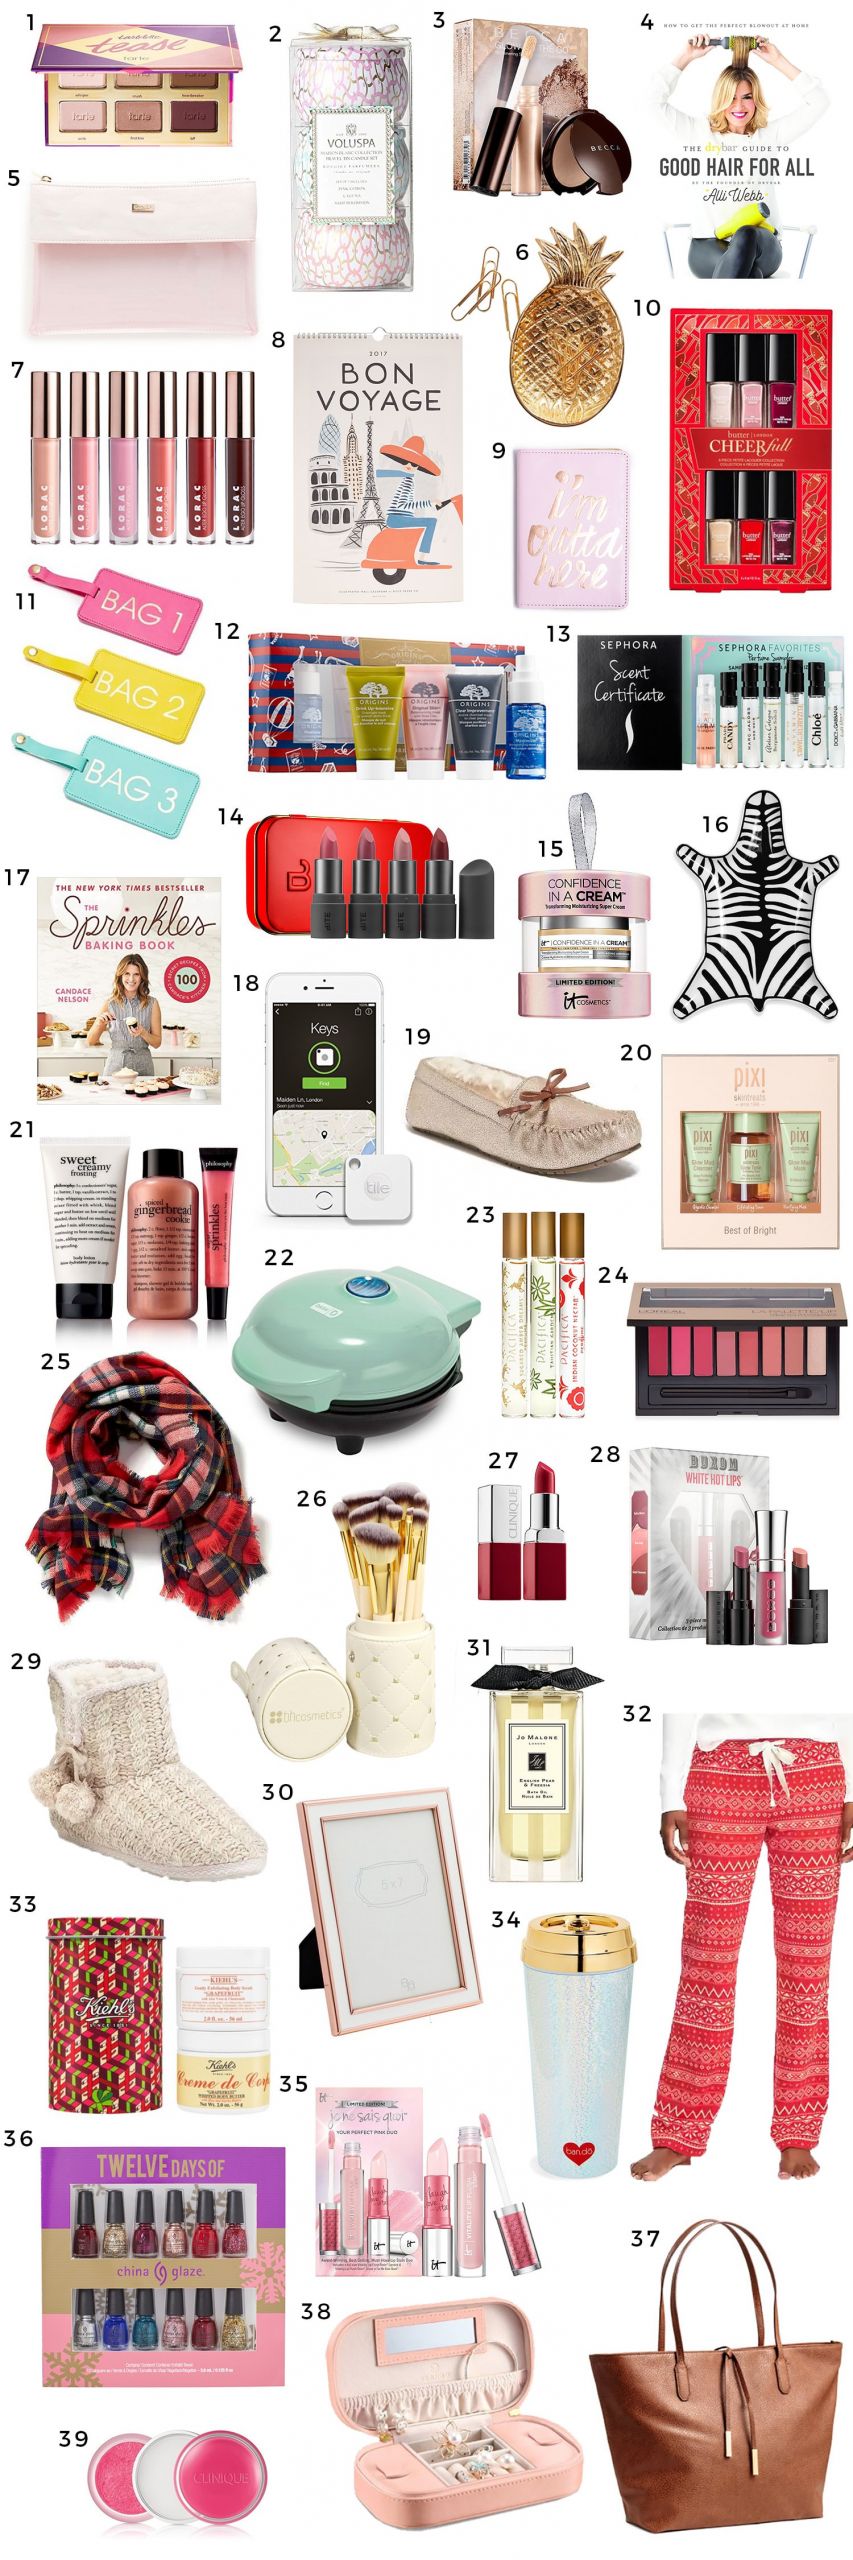 Good Holiday Gift Ideas
 The Best Christmas Gift Ideas for Women under $25